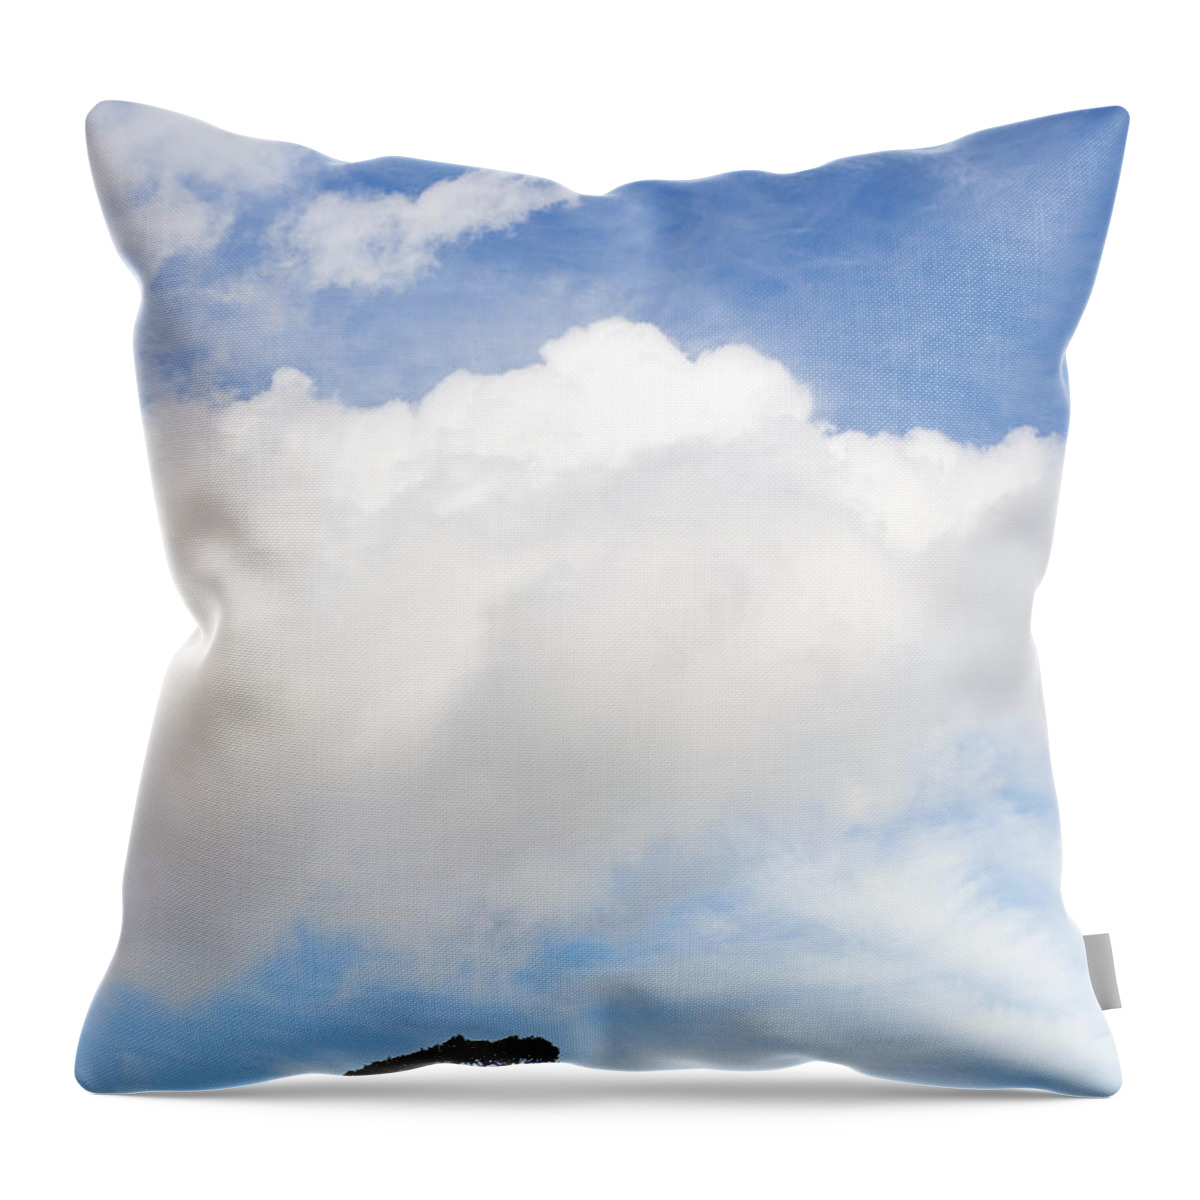 Landscape Throw Pillow featuring the photograph One Tree Hill by Mal Bray